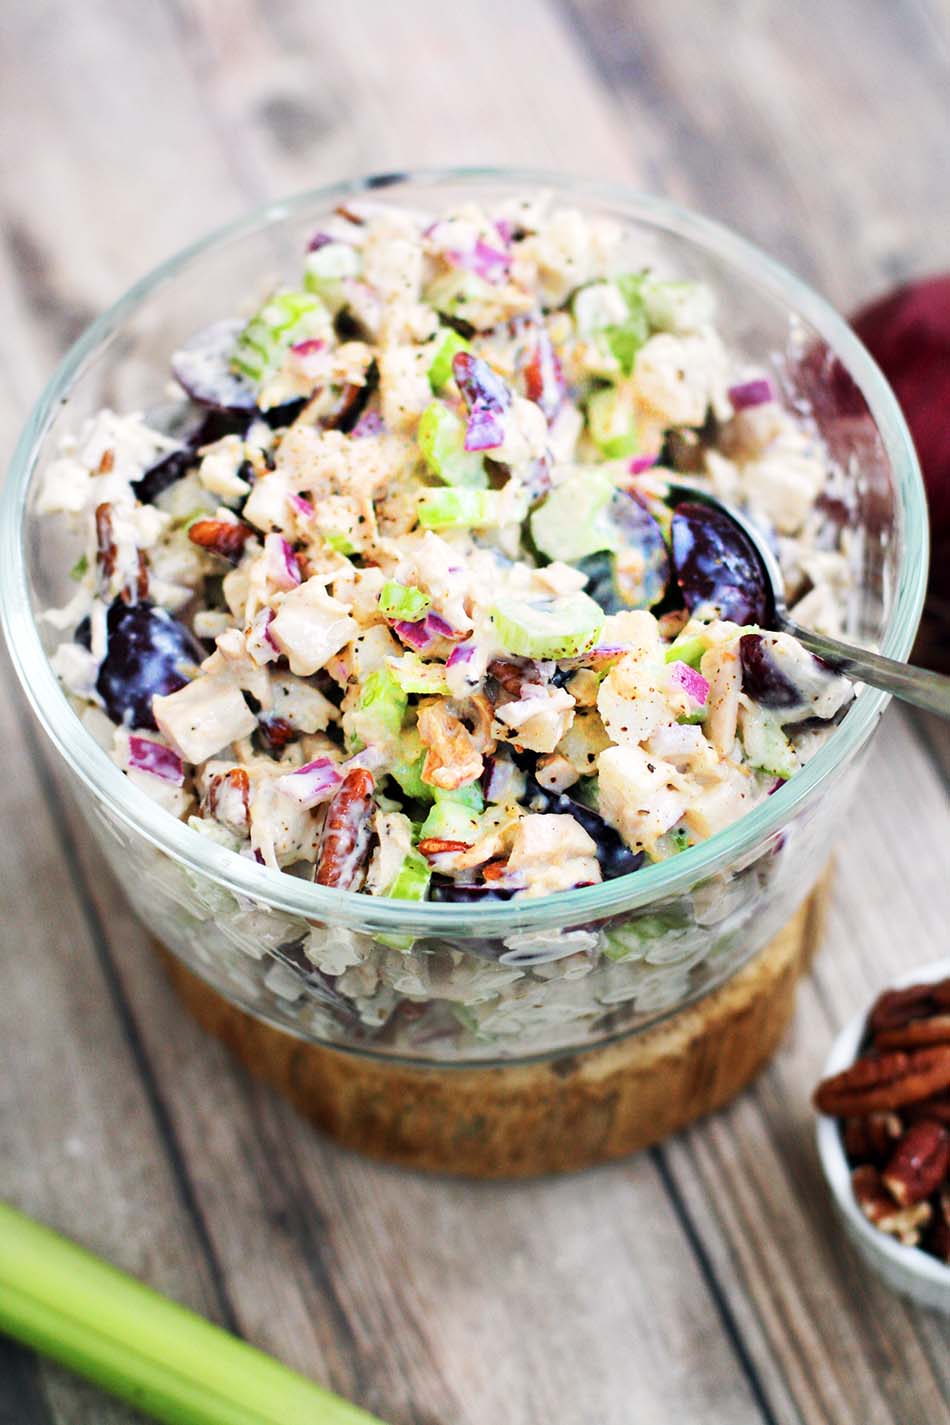 Amazing leftover turkey salad: With grapes, water chestnuts, celery and other good stuff added!